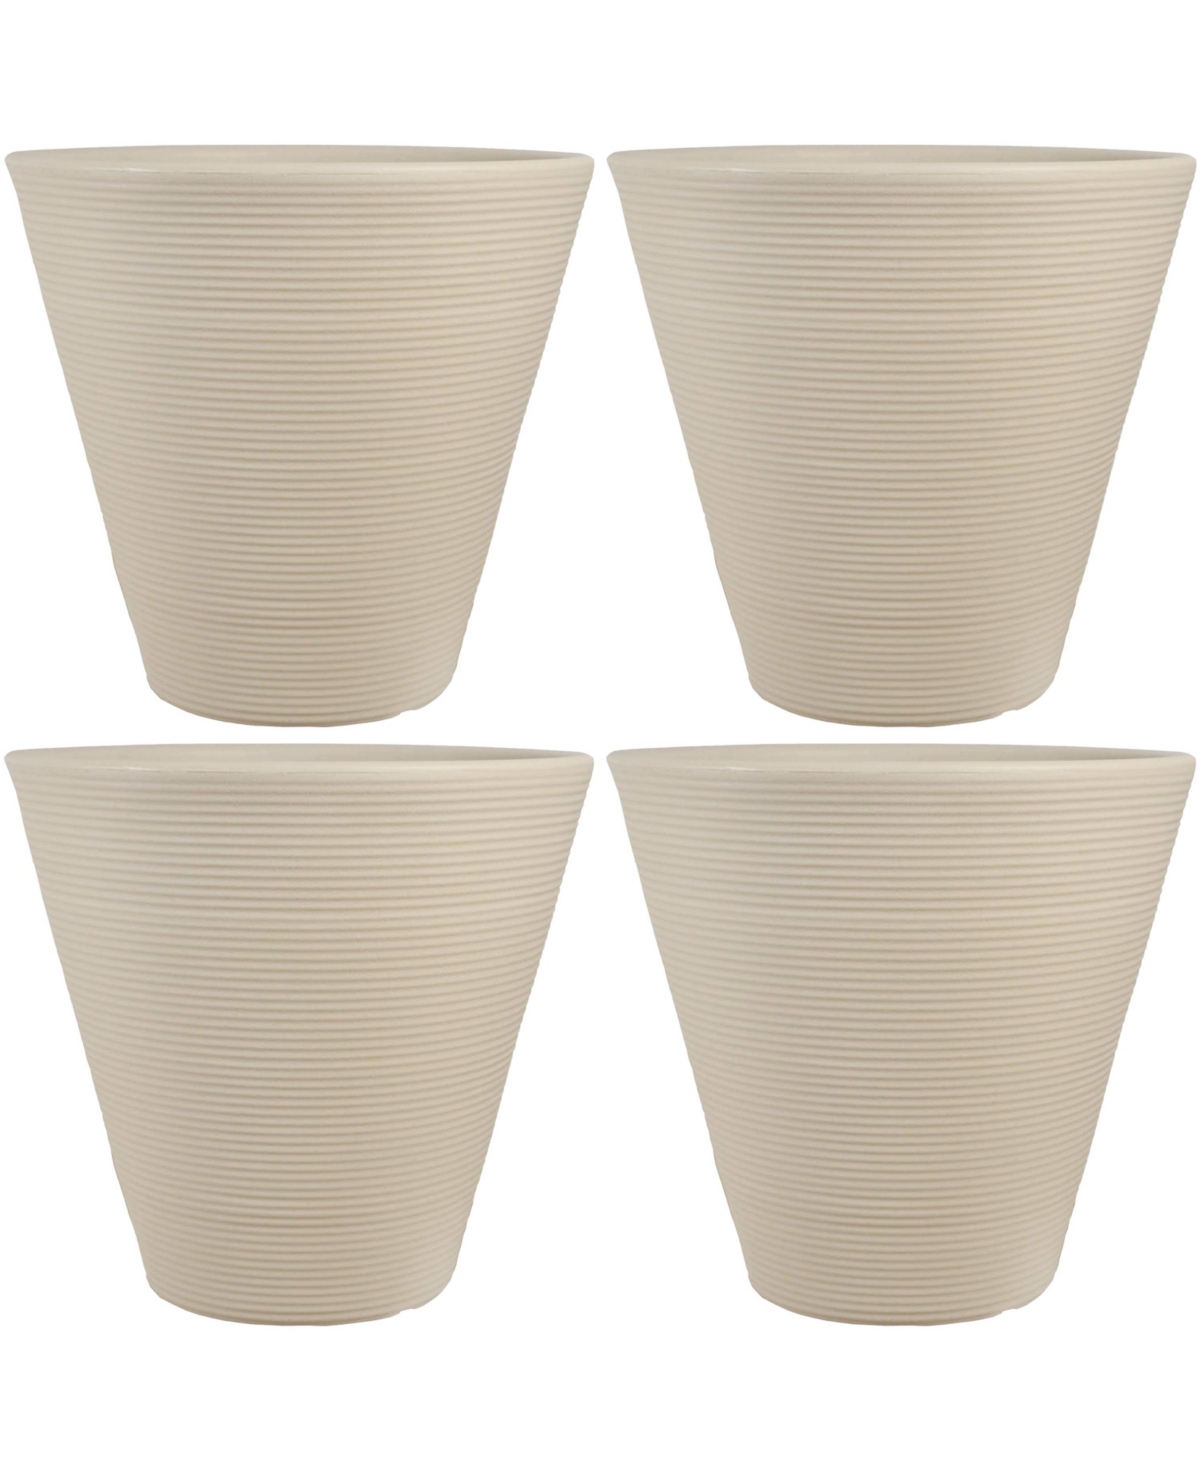 15.5 in Walter Dual-Wall Polyresin Planter - Beige - Set of 4 - Light Brown